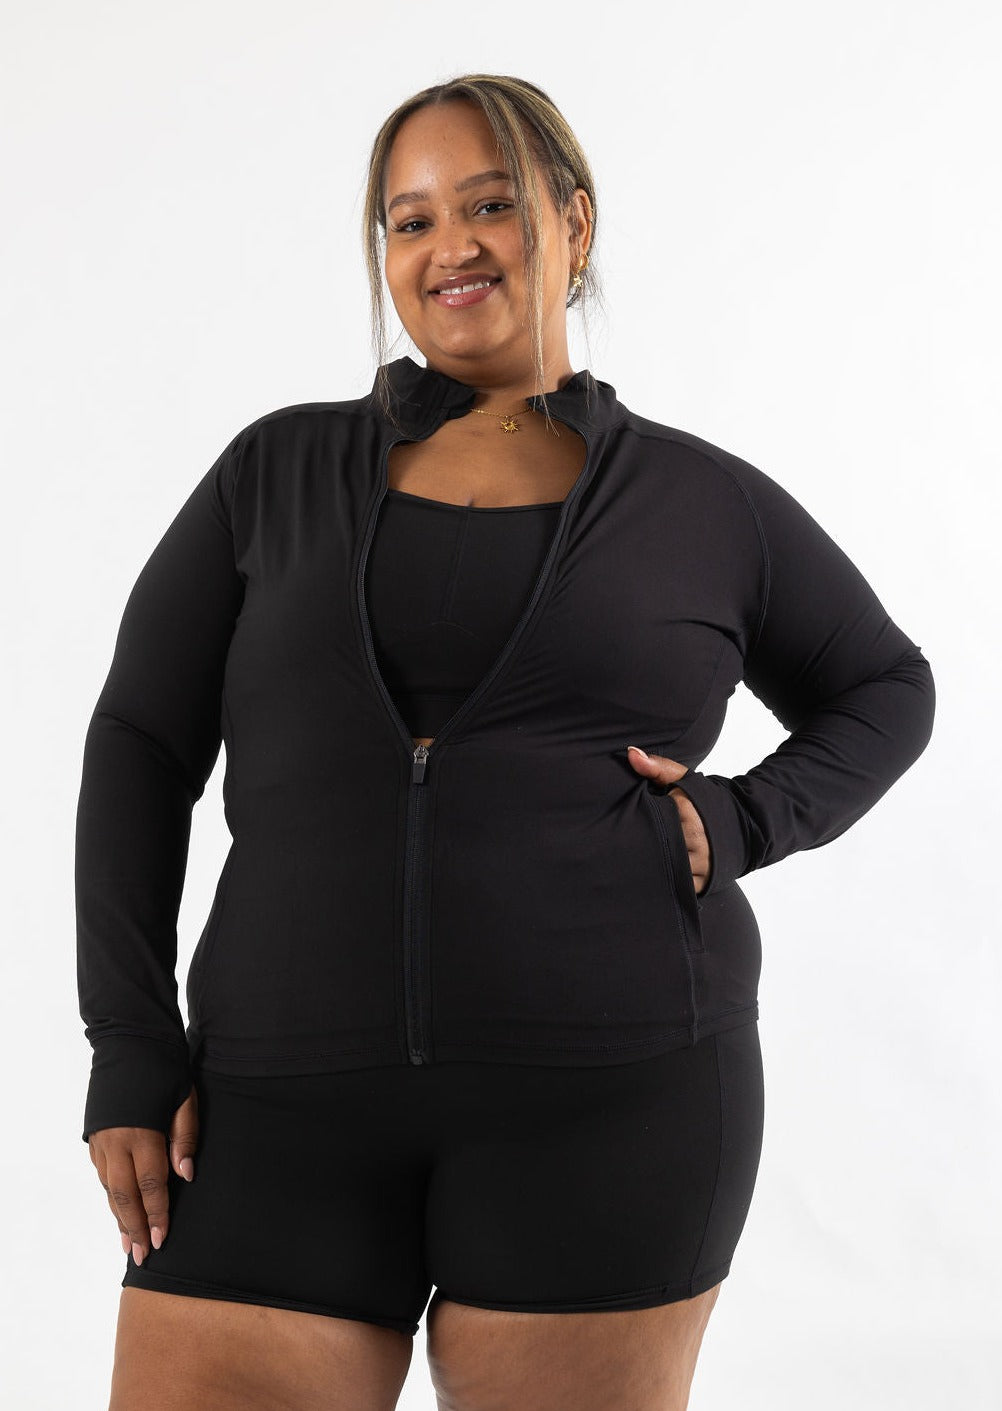 Supportive Gymwear - Inclusive Activewear